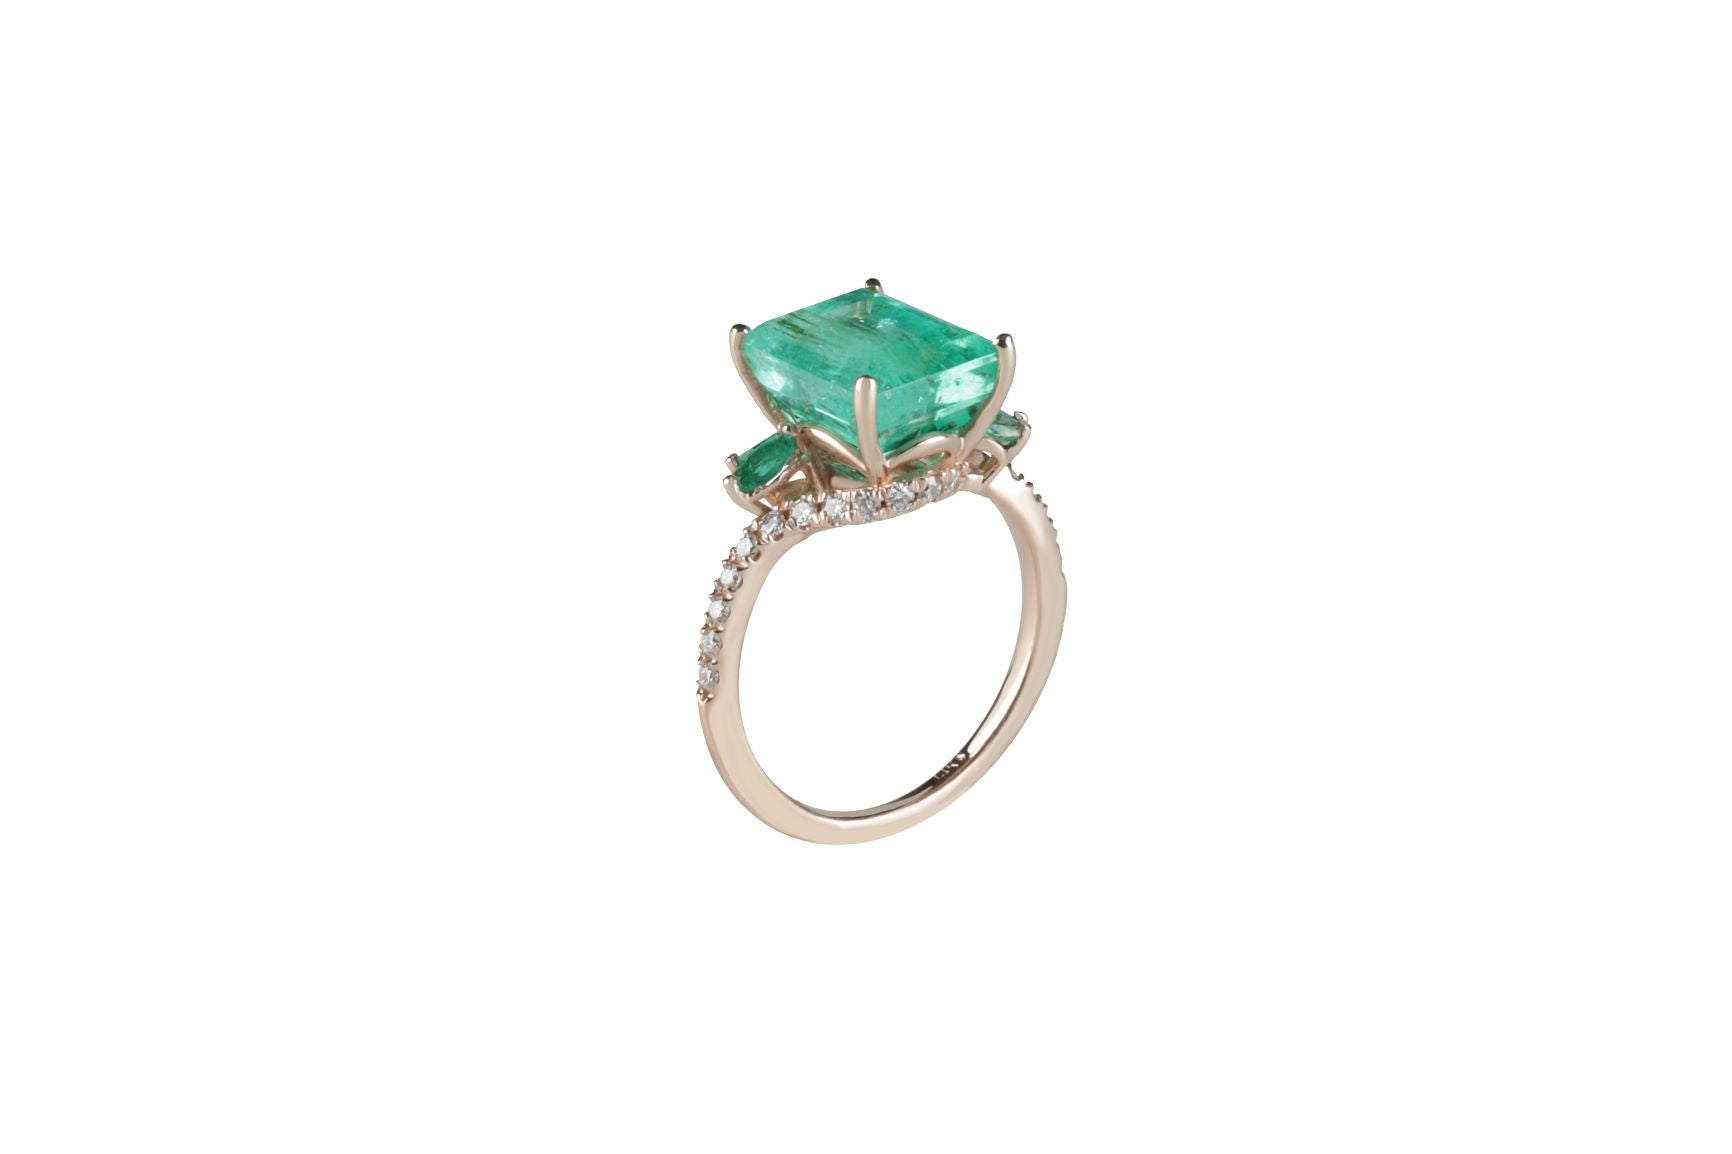 GIA Certified 4.75 ct Emerald and Diamond Ring